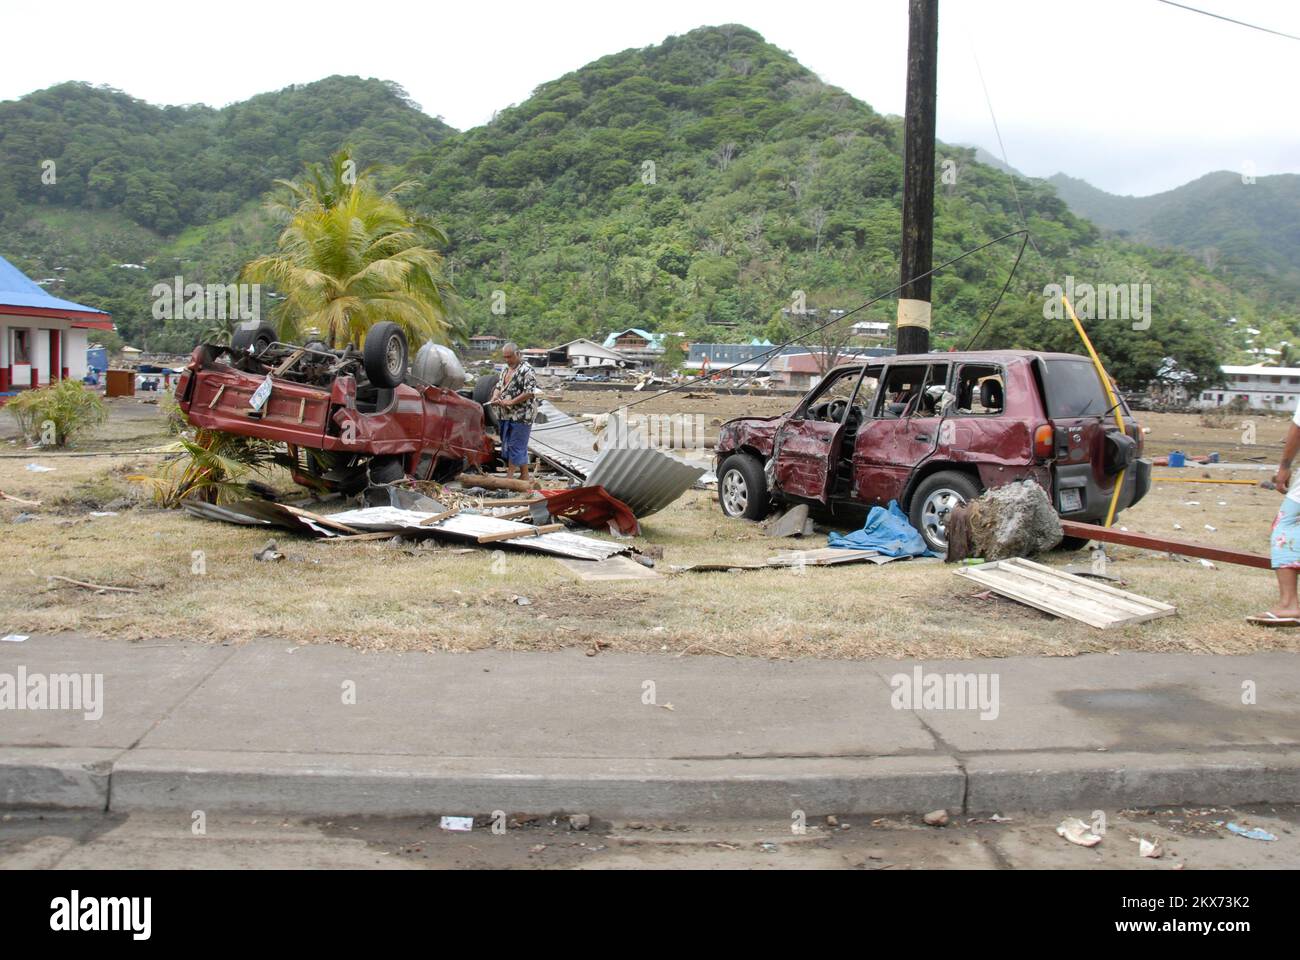 Earthquake   Tsunami - Pago Pago, American Samoa, October 1, 2009   Pago Pago, October 1, 2009 - A resident of American Samopa two cars that were damaged by the tsumani that hit American Samoa.. American Samoa Earthquake, Tsunami, and Flooding. Photographs Relating to Disasters and Emergency Management Programs, Activities, and Officials Stock Photo